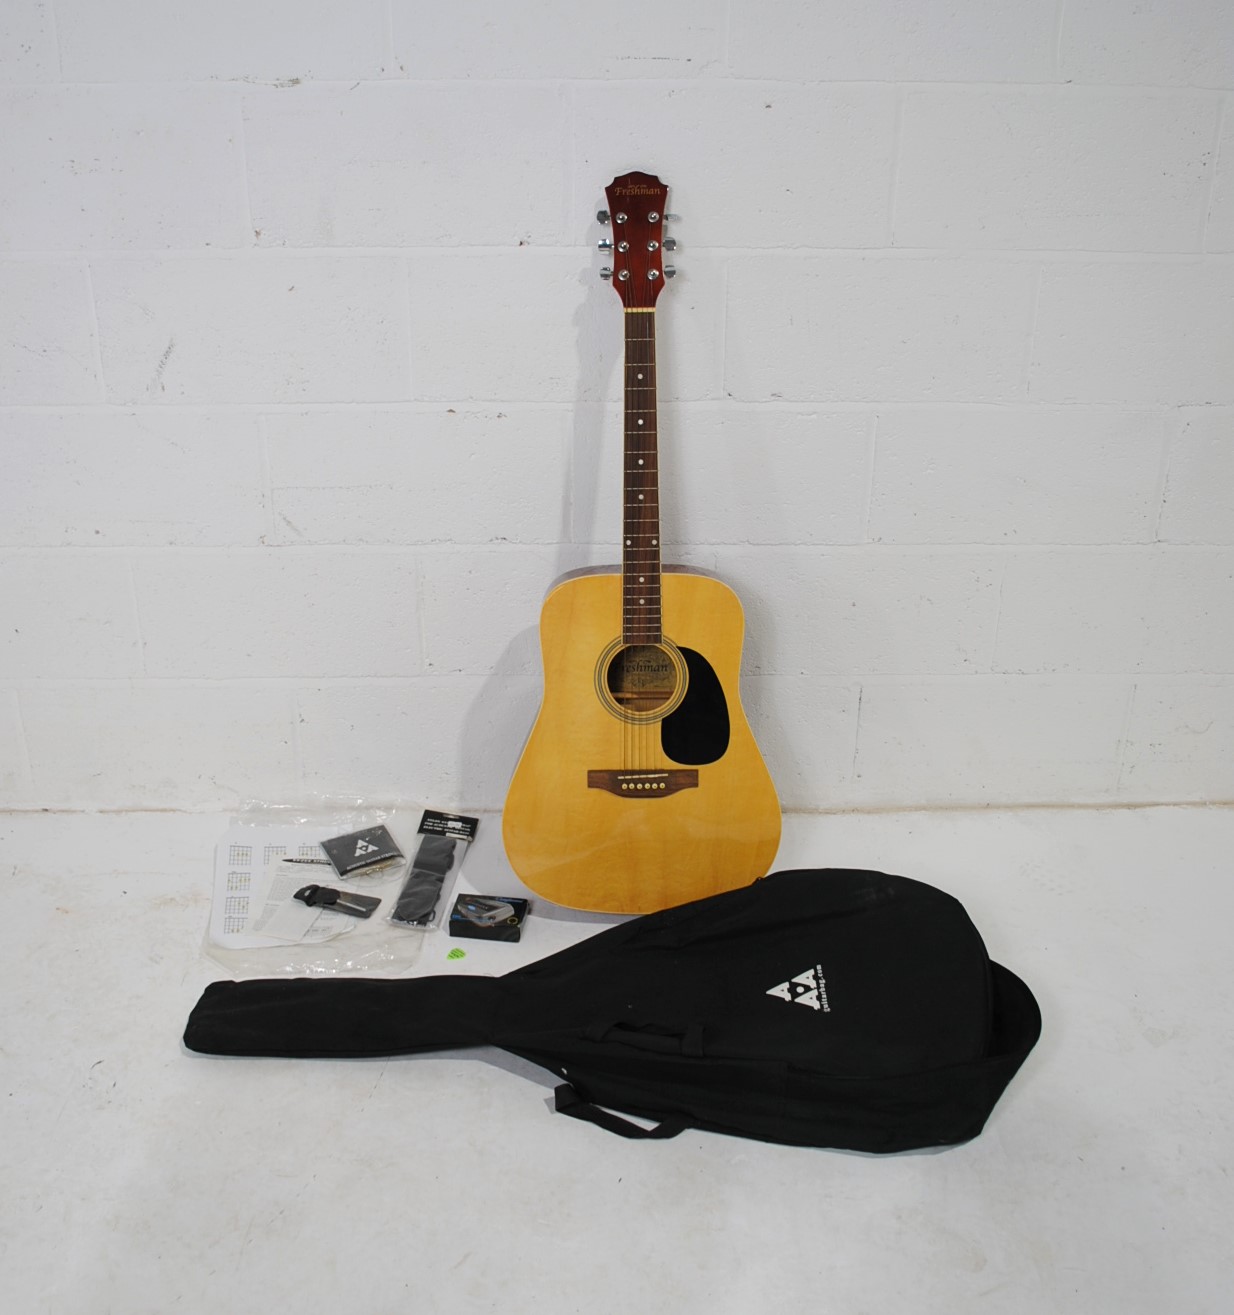 A Freshman six string acoustic guitar, with soft case and accessories